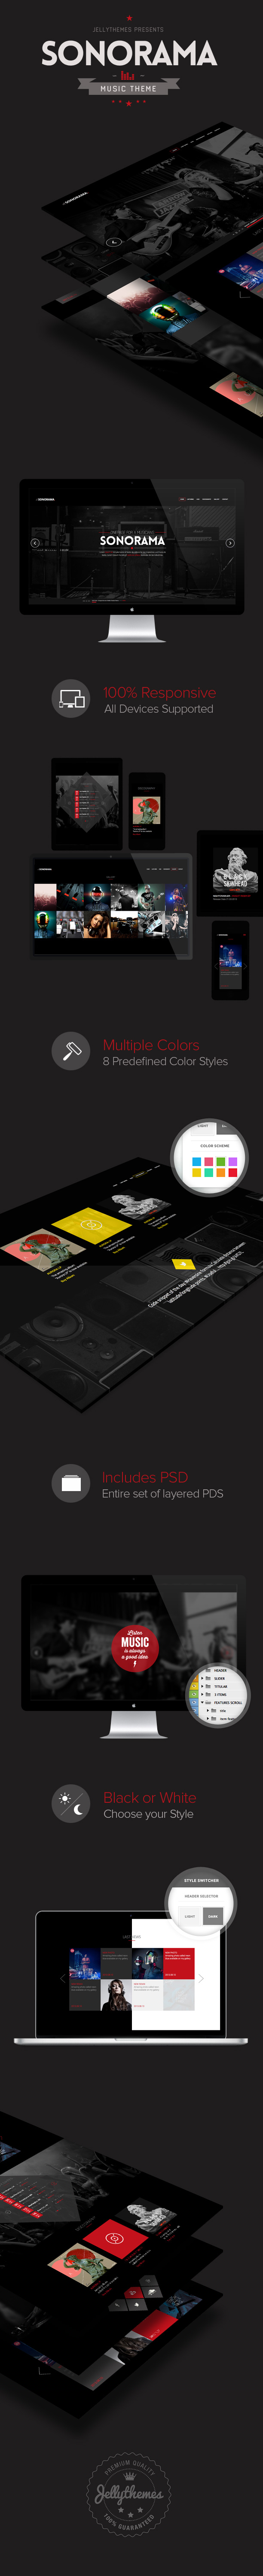 Sonorama - Onepage Music Template - 3